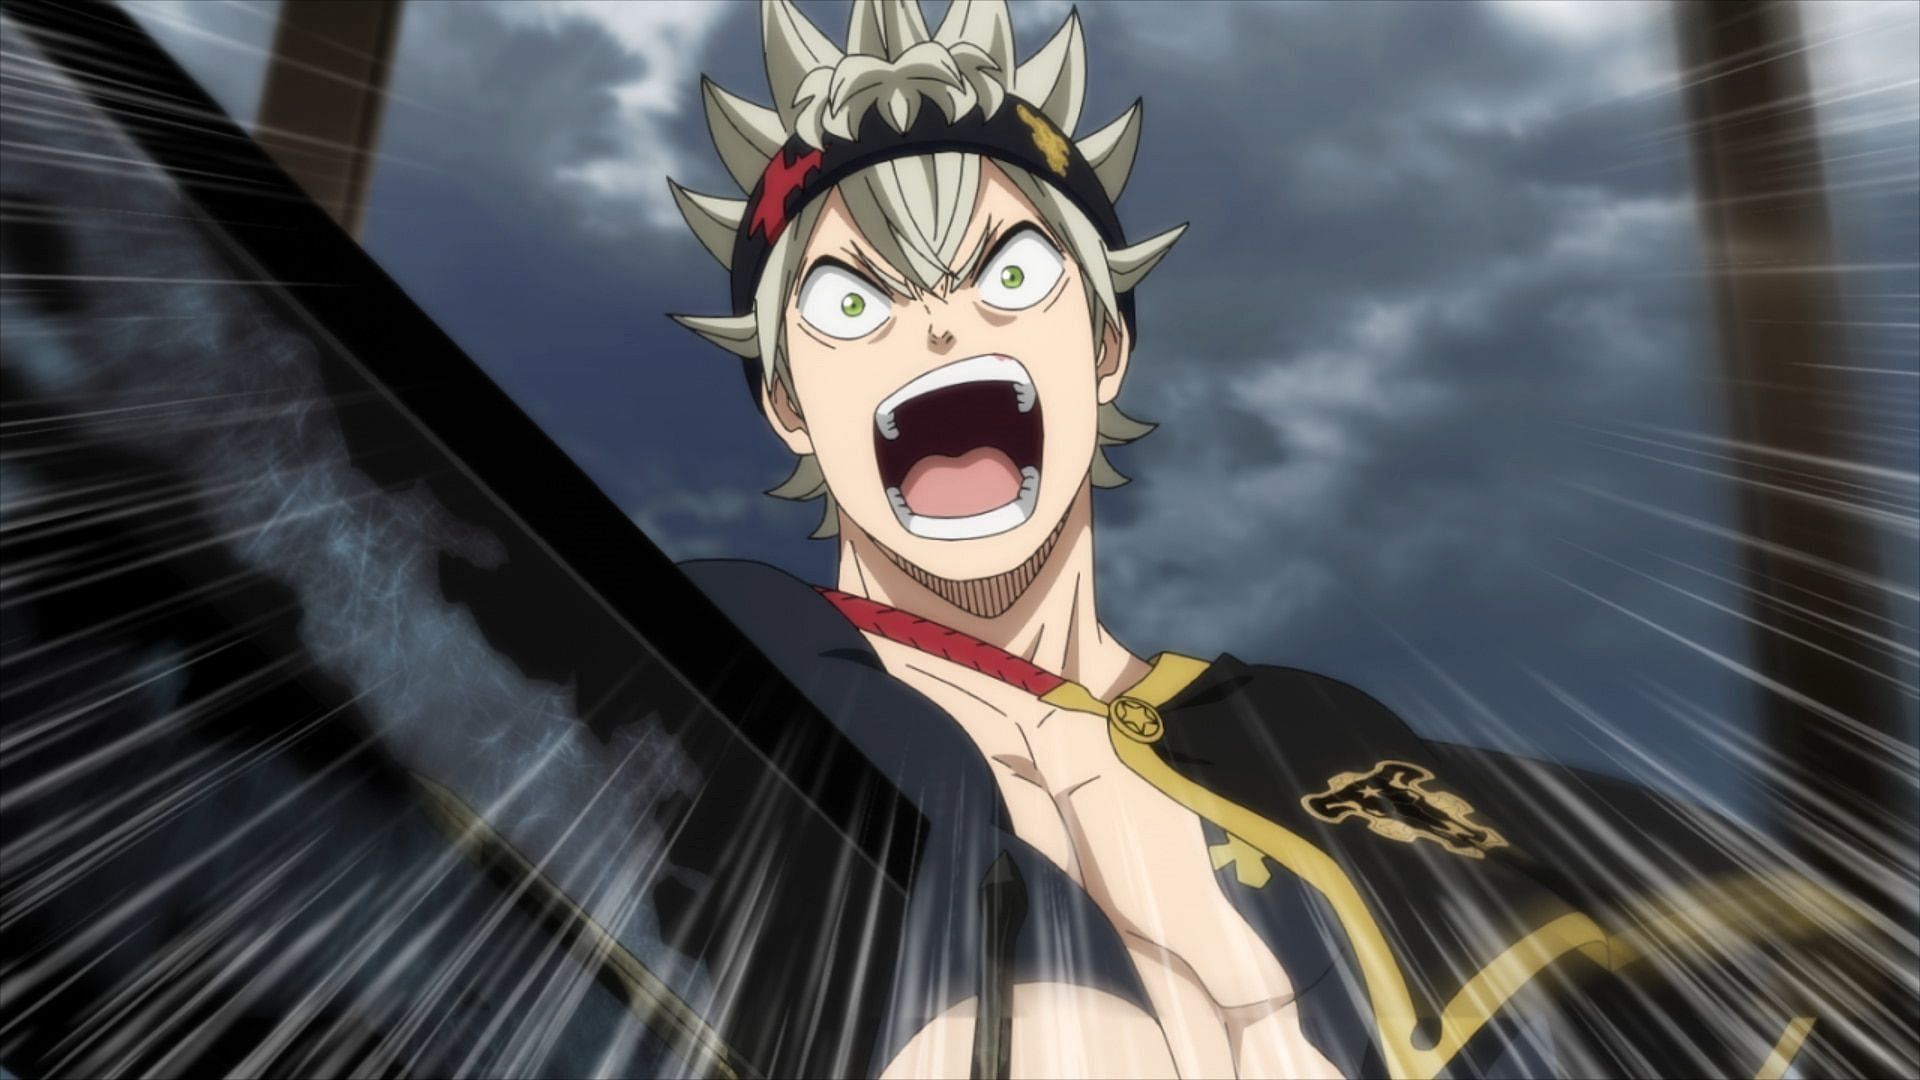 As is tradition, a Yami family member seems poised to help Asta surpass his limits based on the latest Black Clover Chapter 340 spoilers (Image via Studio Pierrot)